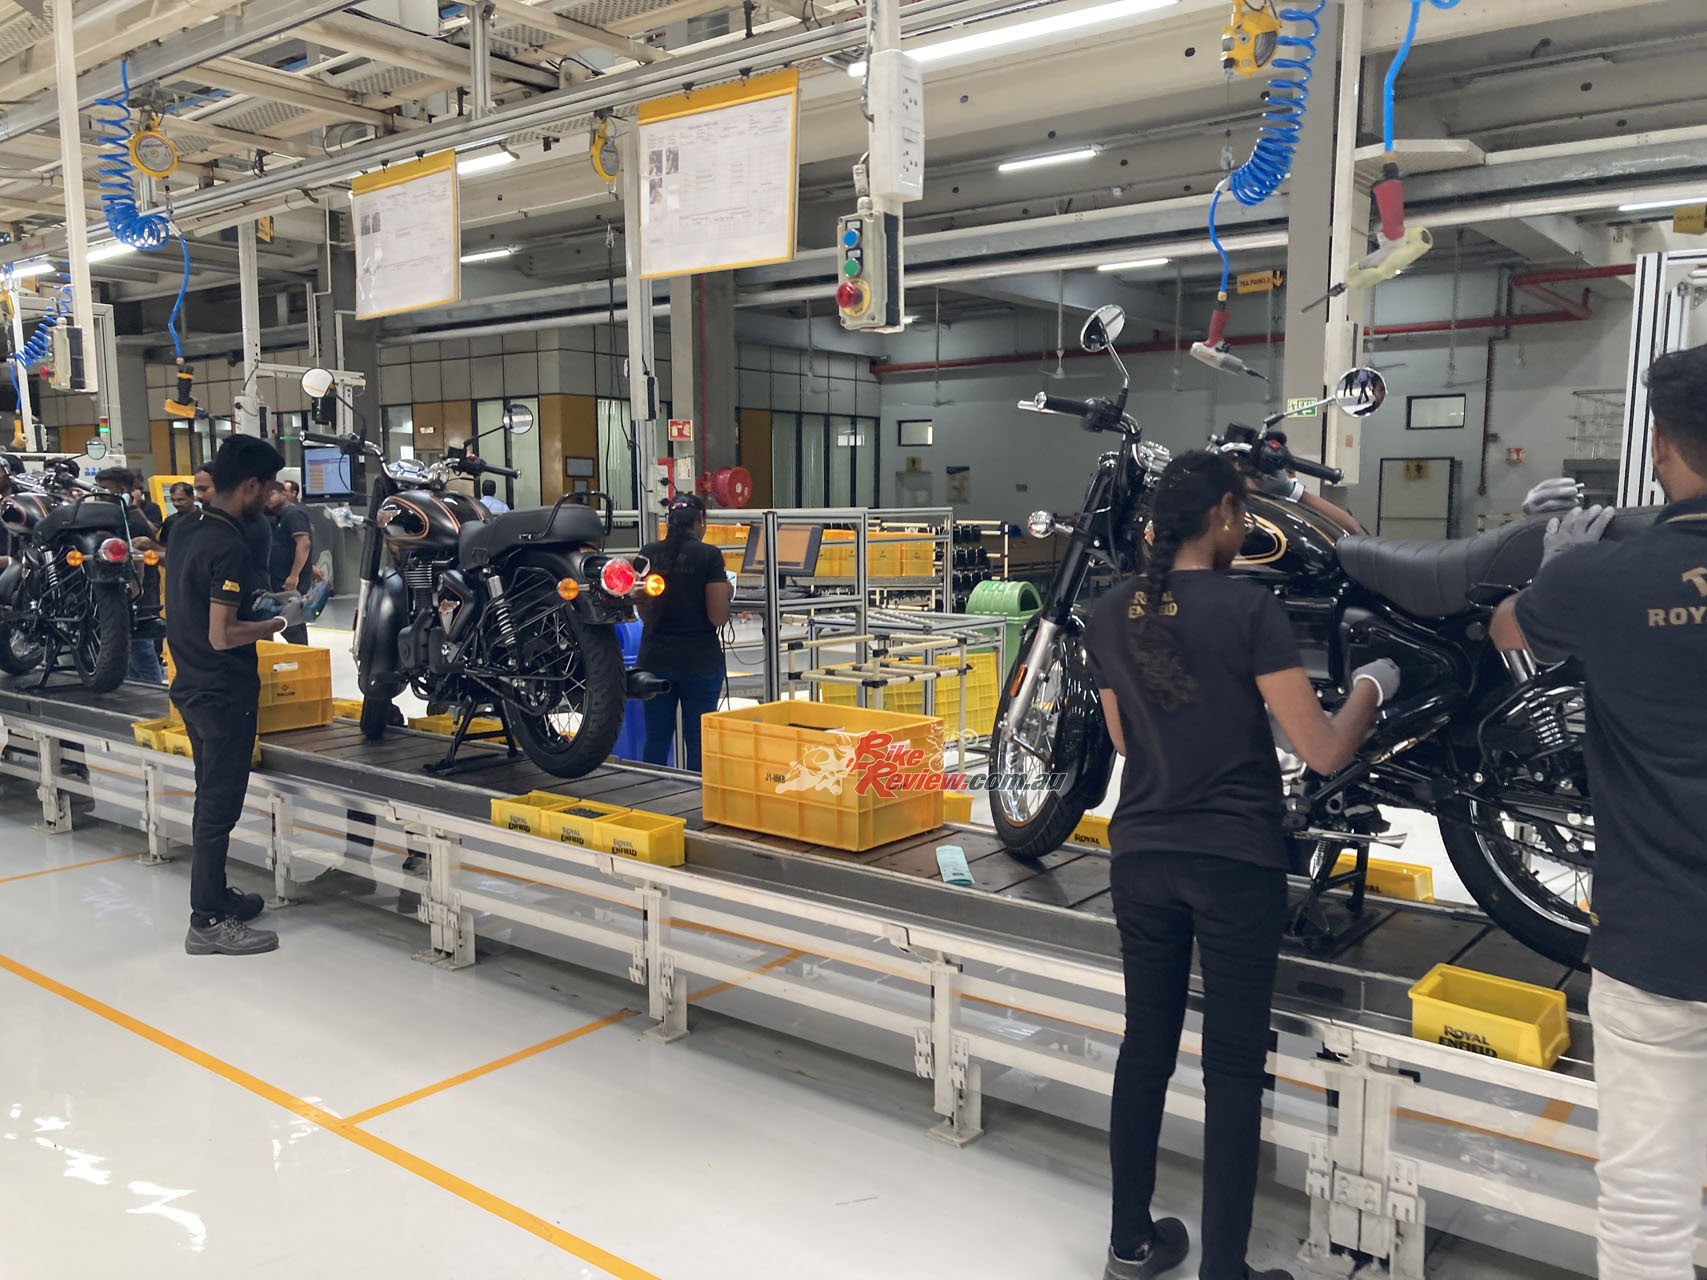 Royal Enfield's Vallum plant produces around 3,300 motorcycles per day, helping feed the 30,000-plus daily bike sales in India... 